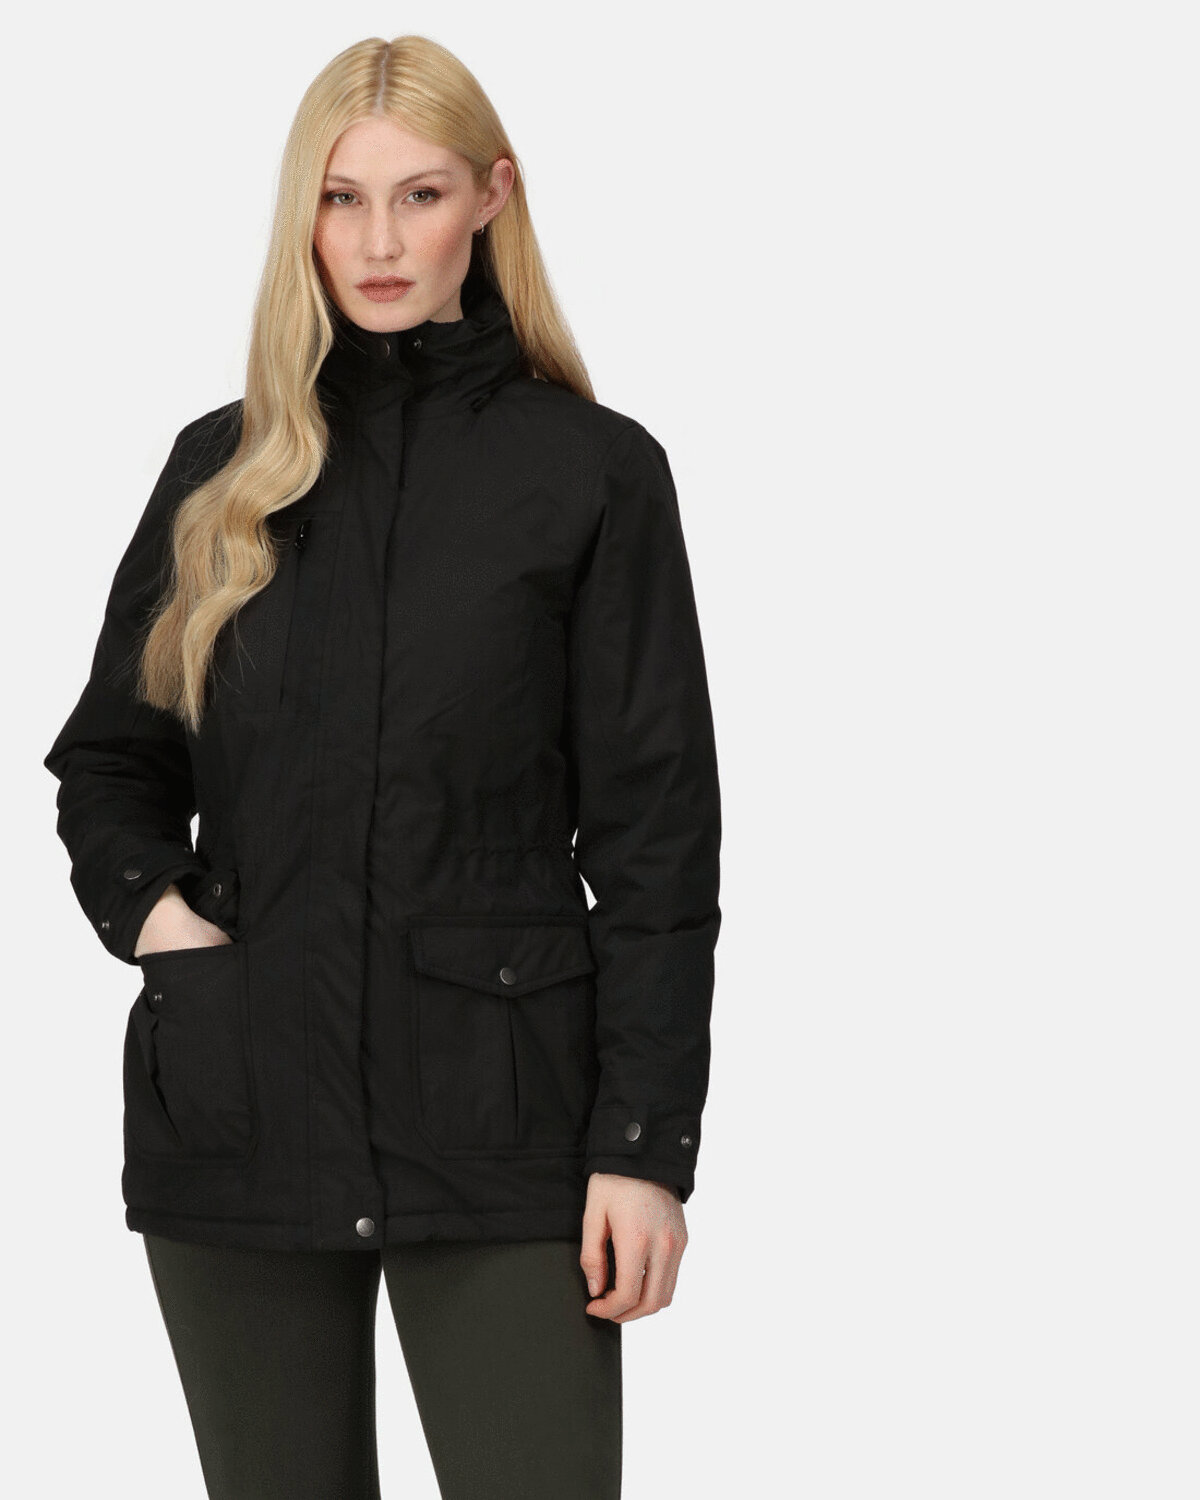 LADIES DARBY III INSULATED PARKA JACKET